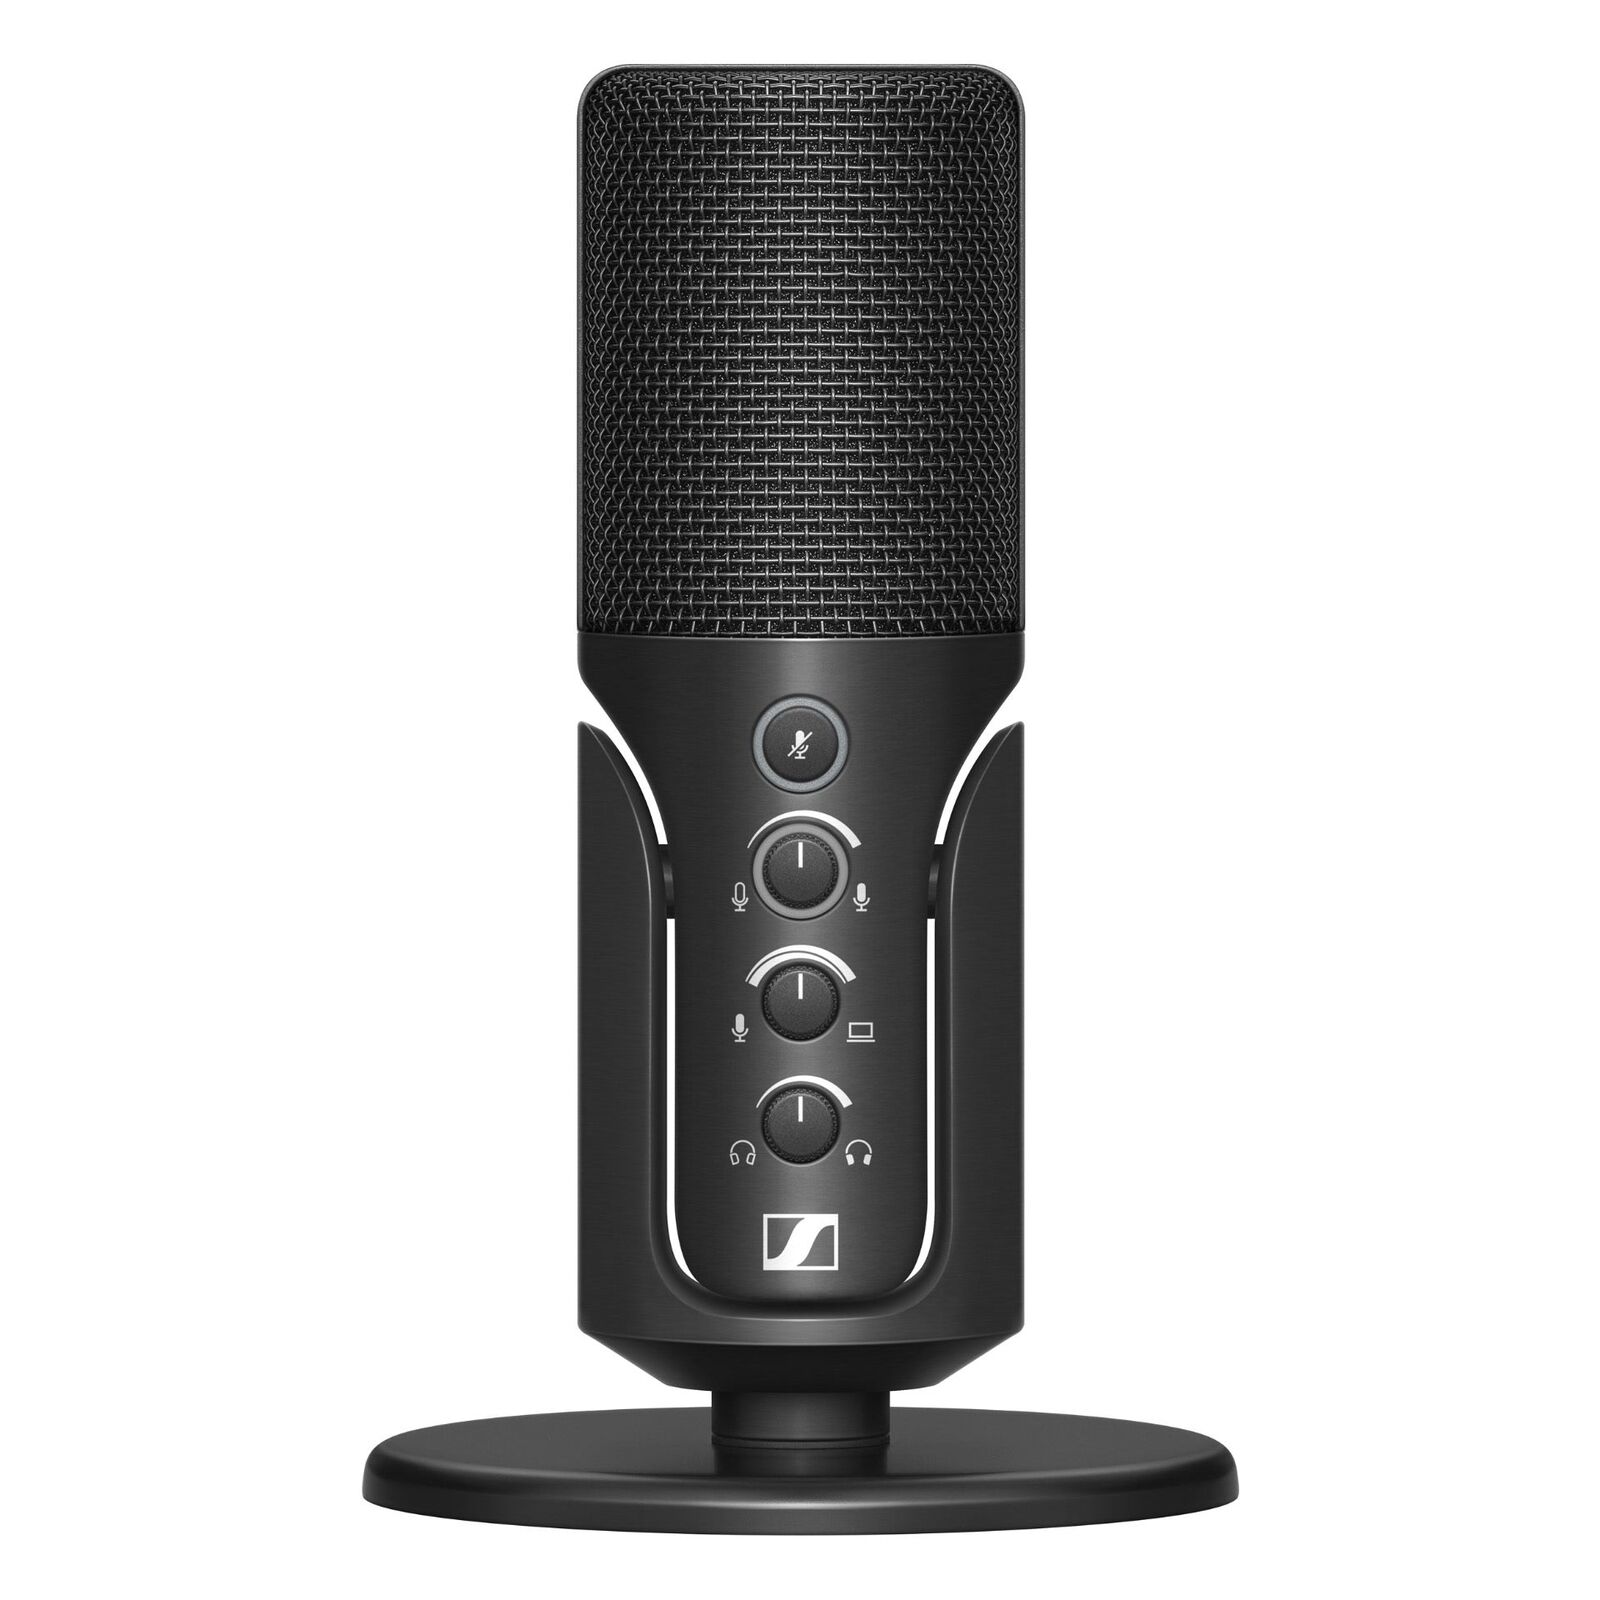 Sennheiser Profile USB Microphone . Available Now for $88.00